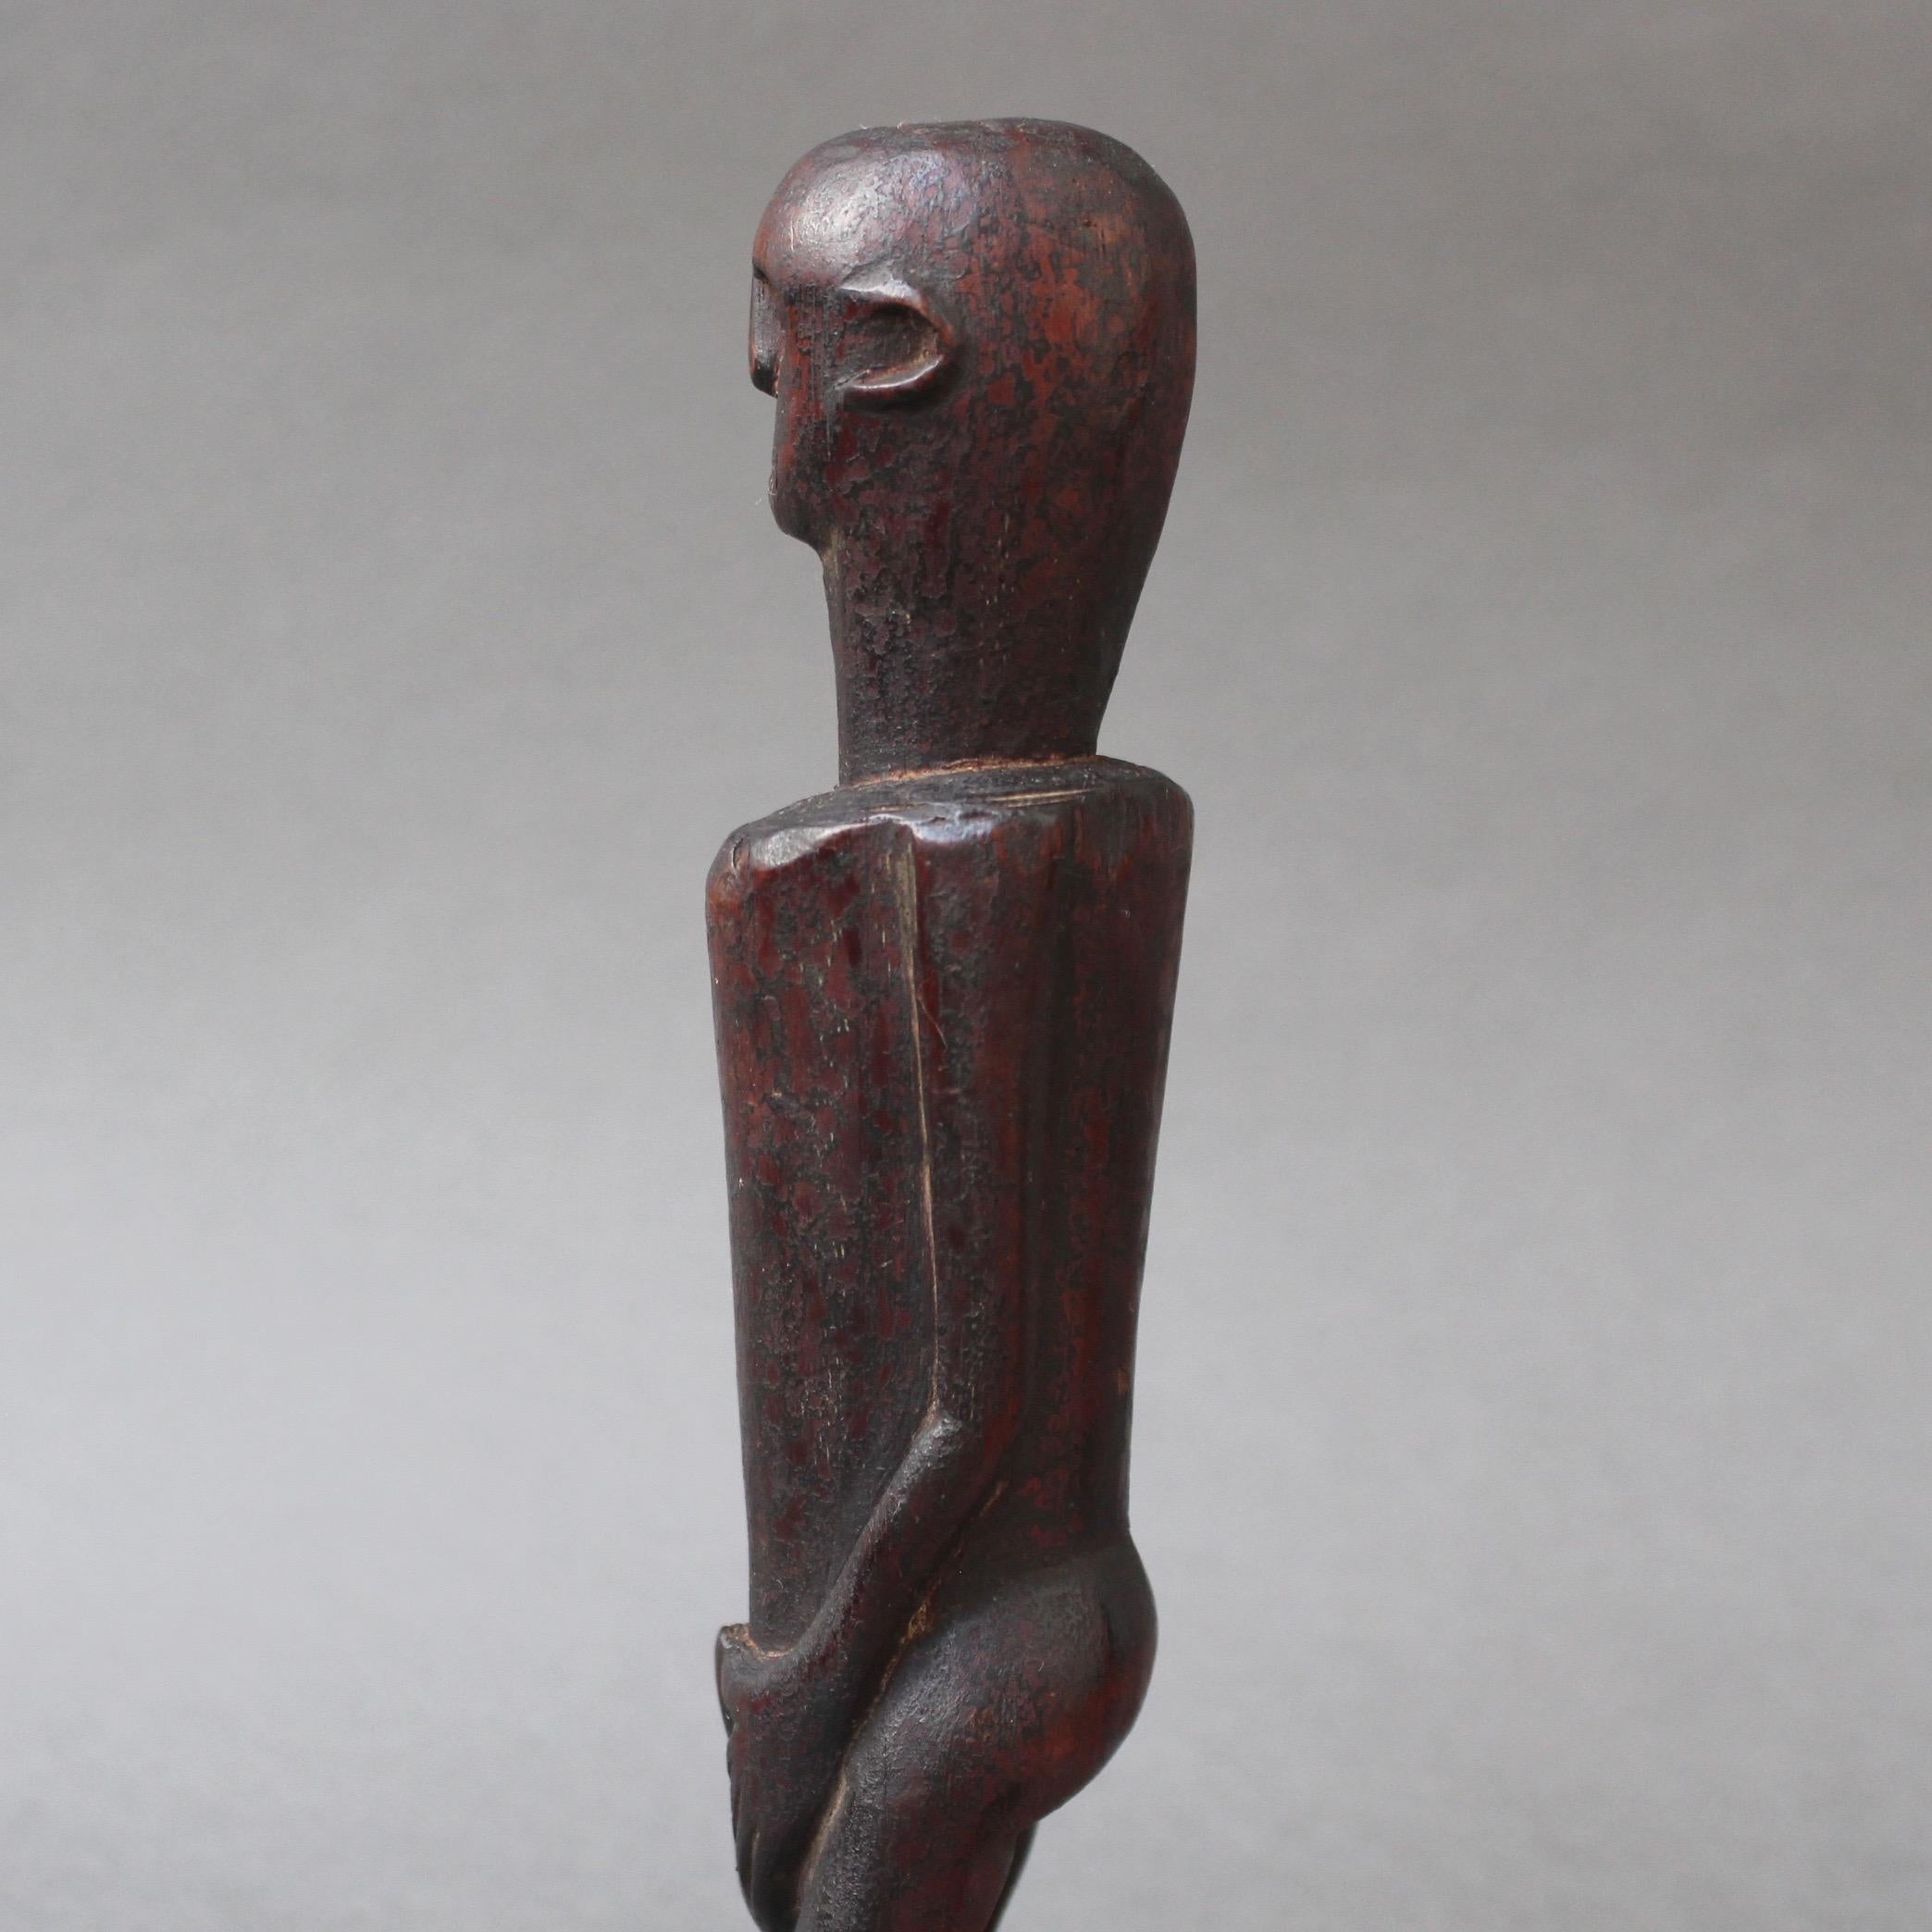 Wooden Sculpture or Carving of Fertility Figure from Sumba Island, Indonesia 6